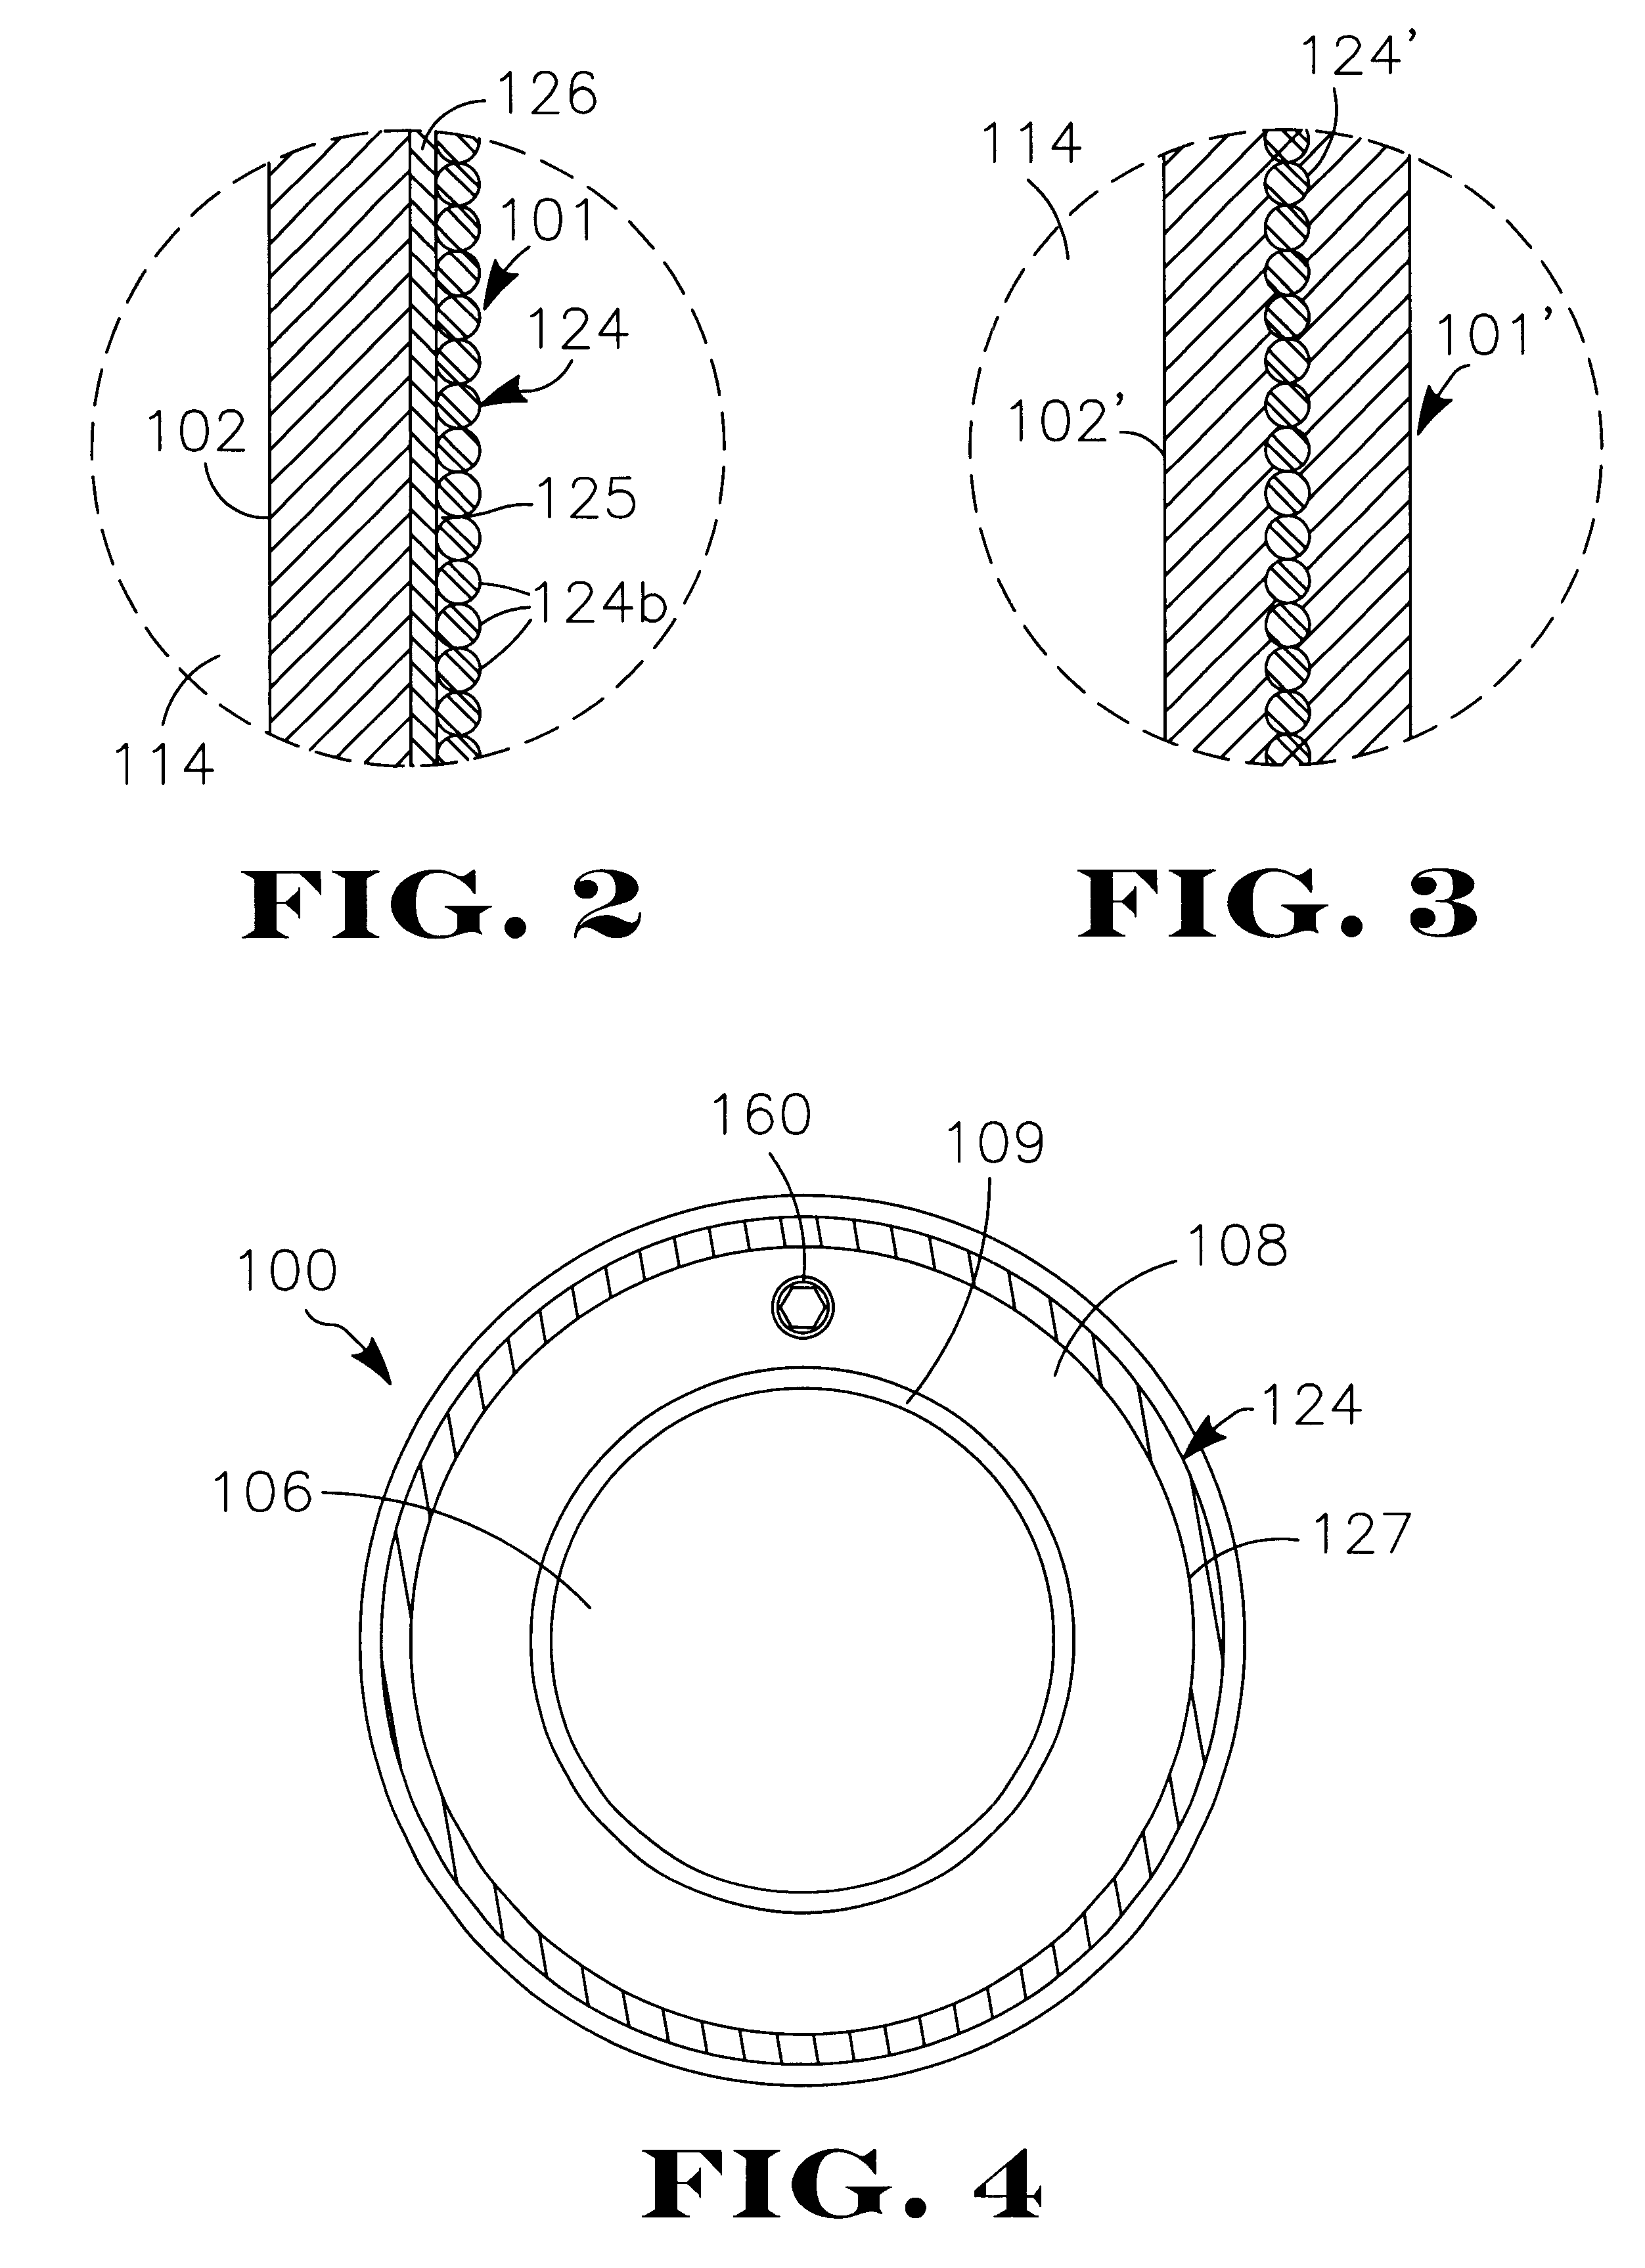 Column structures and methods for supporting compressive loads